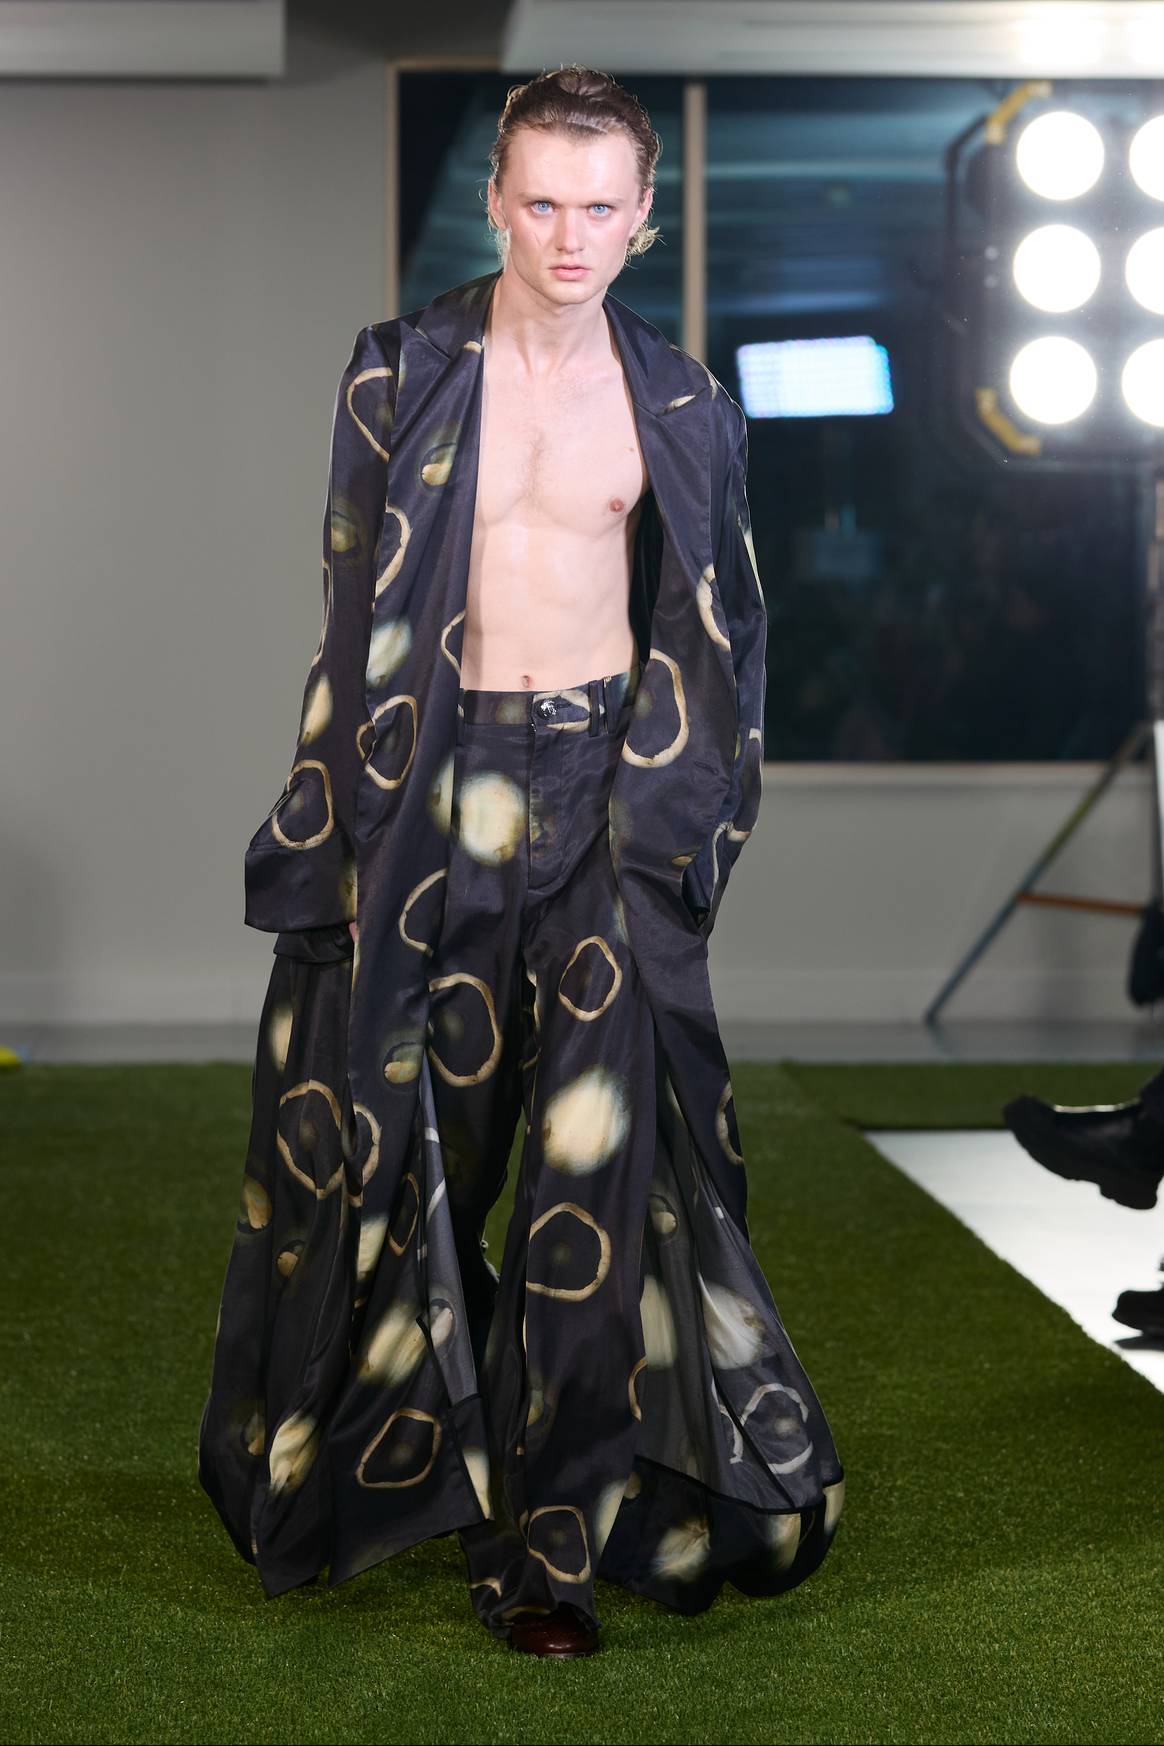 Image: Patrick McDowell; 'Cinderella Shall go to the Football' AW23